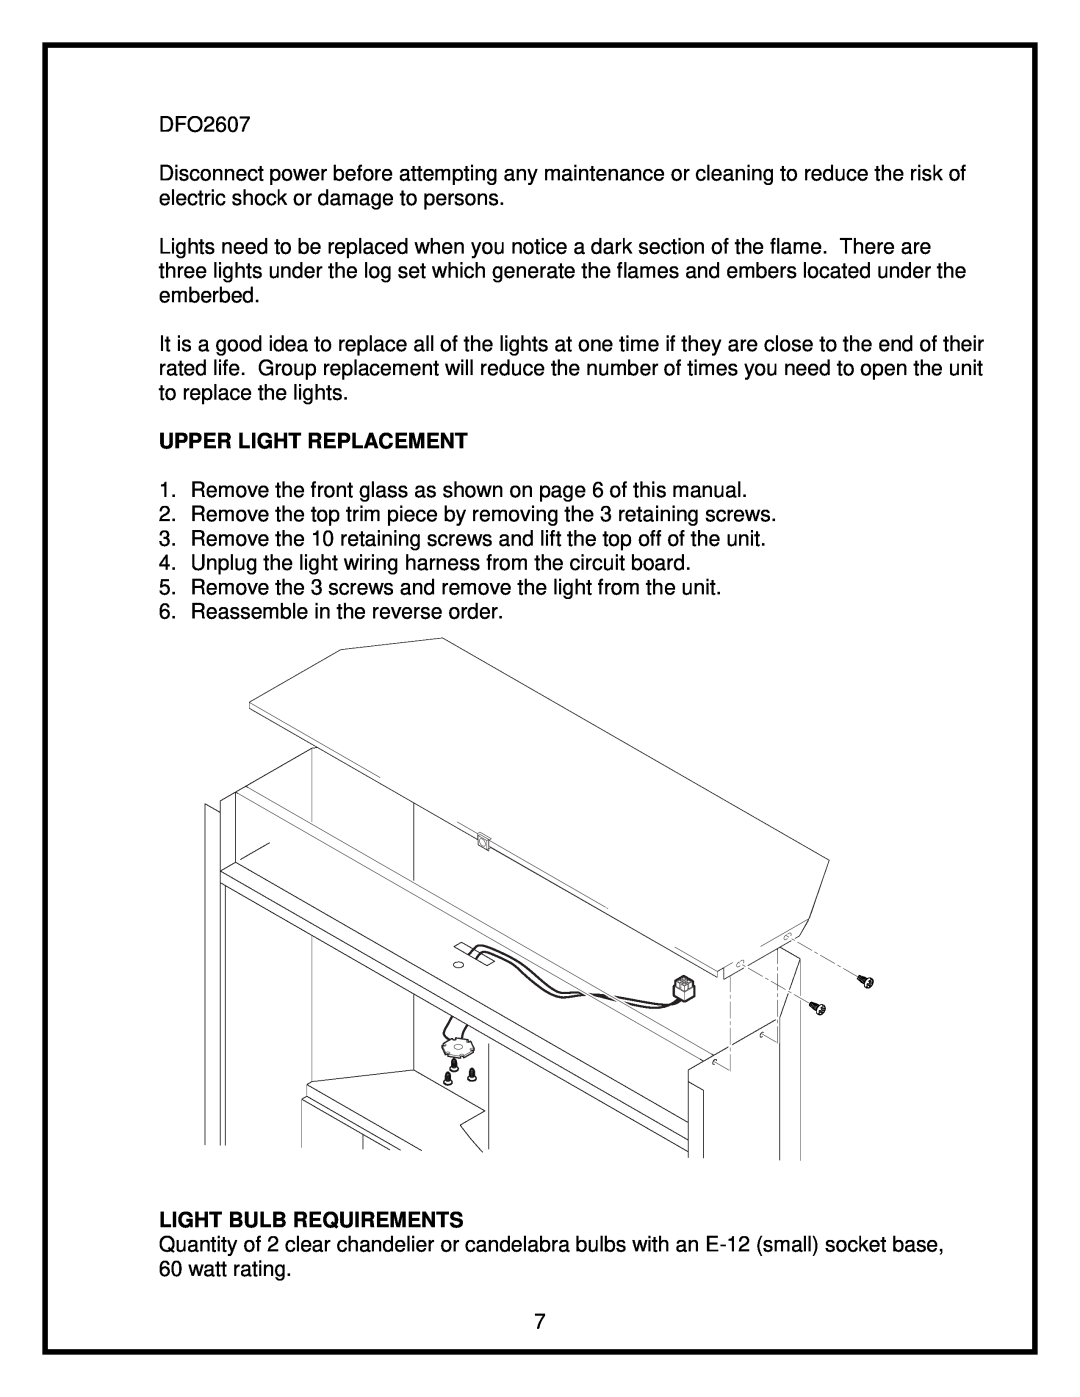 Dimplex 26 service manual Upper Light Replacement, Light Bulb Requirements 